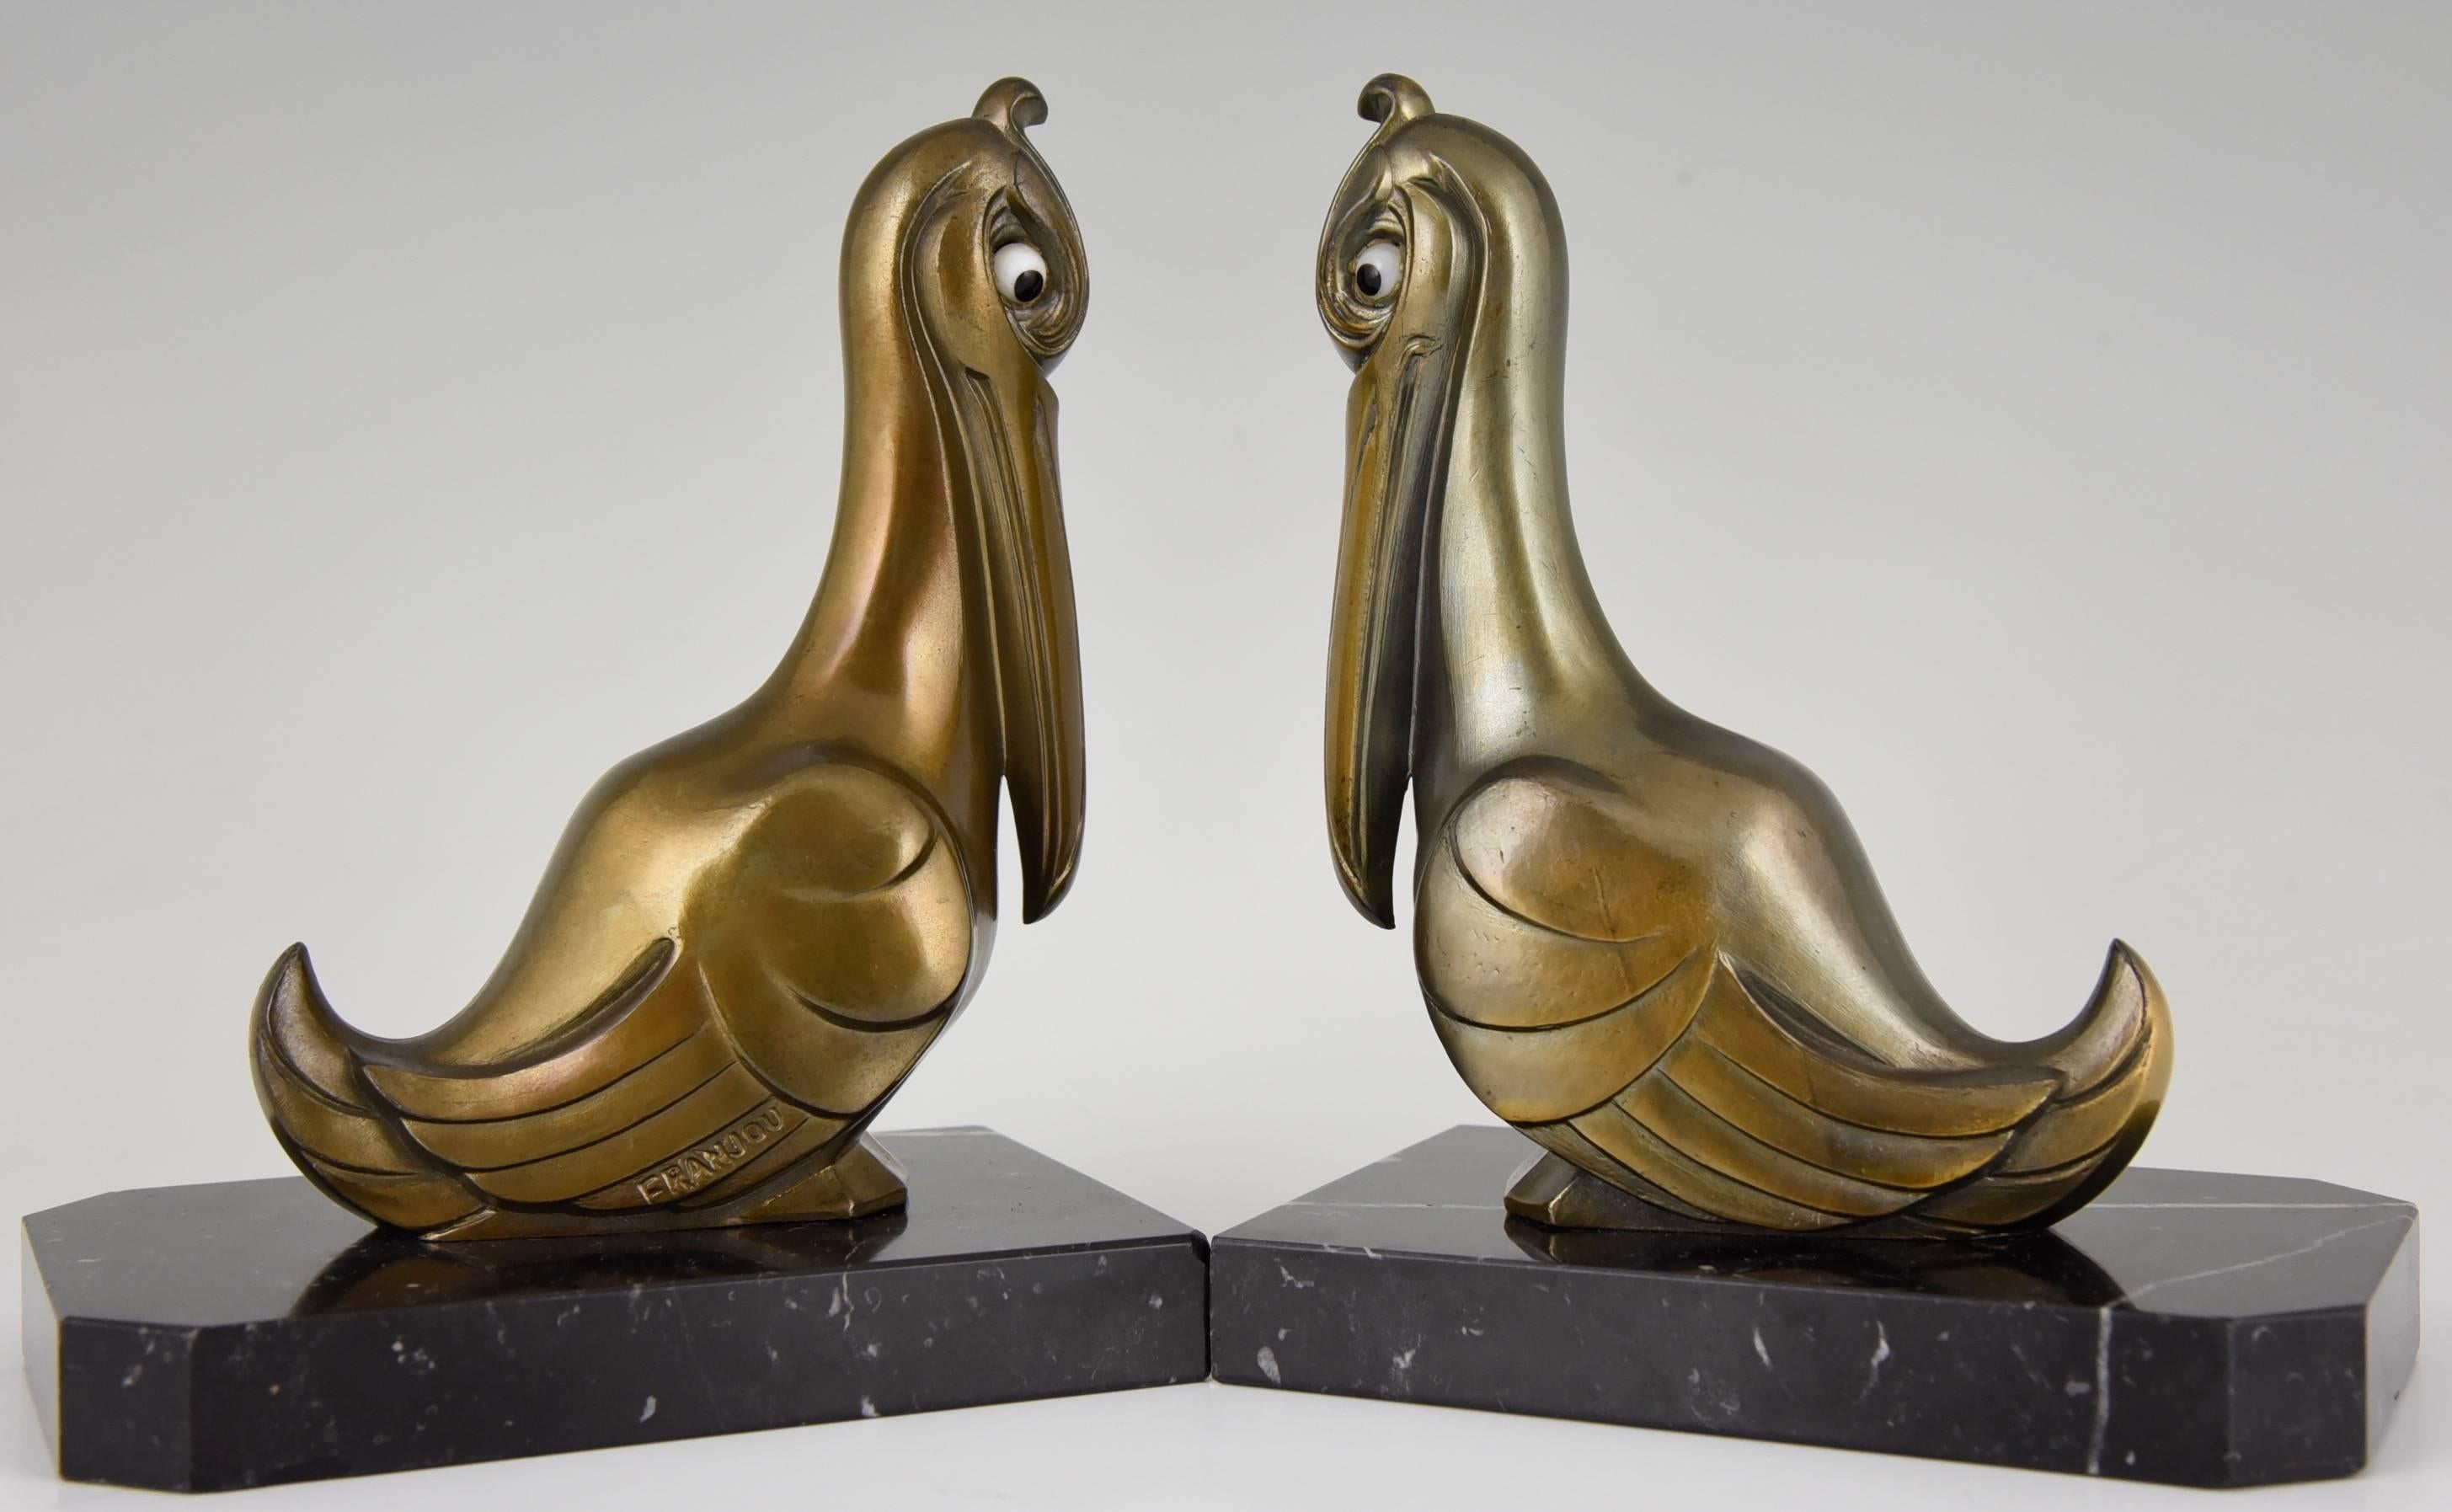 Pelican Bookends - 5 For Sale on 1stDibs